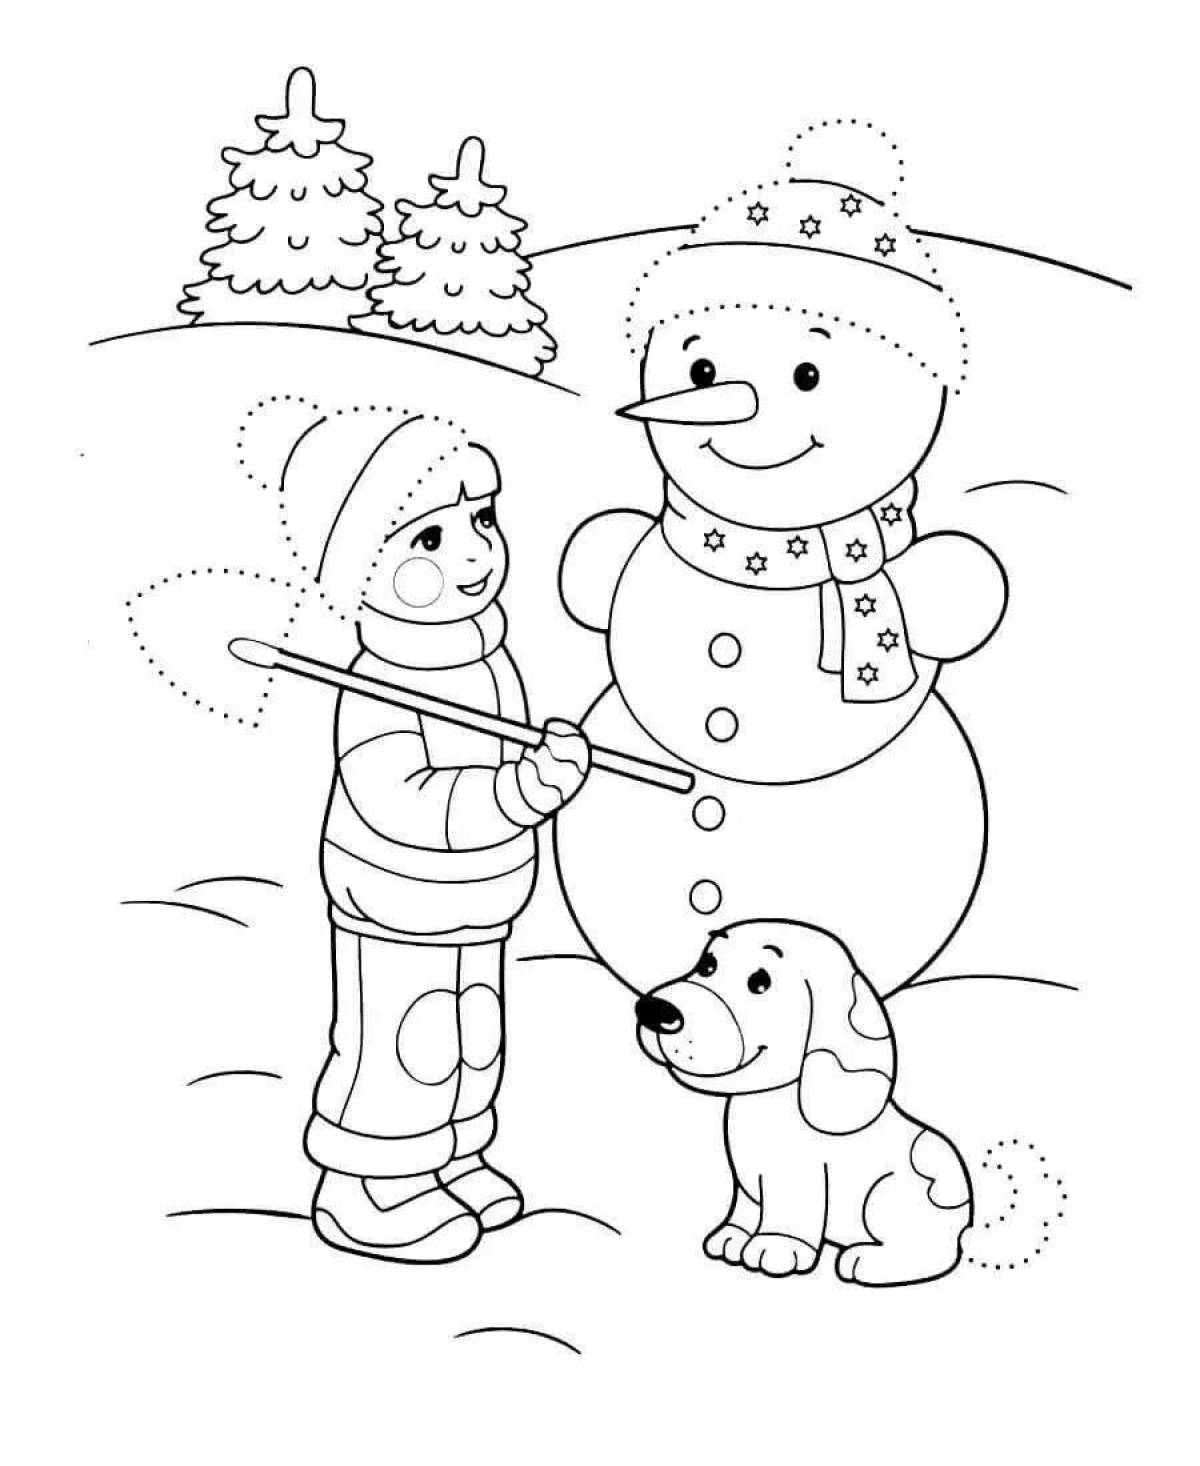 A fun winter coloring book for kids 4-5 years old